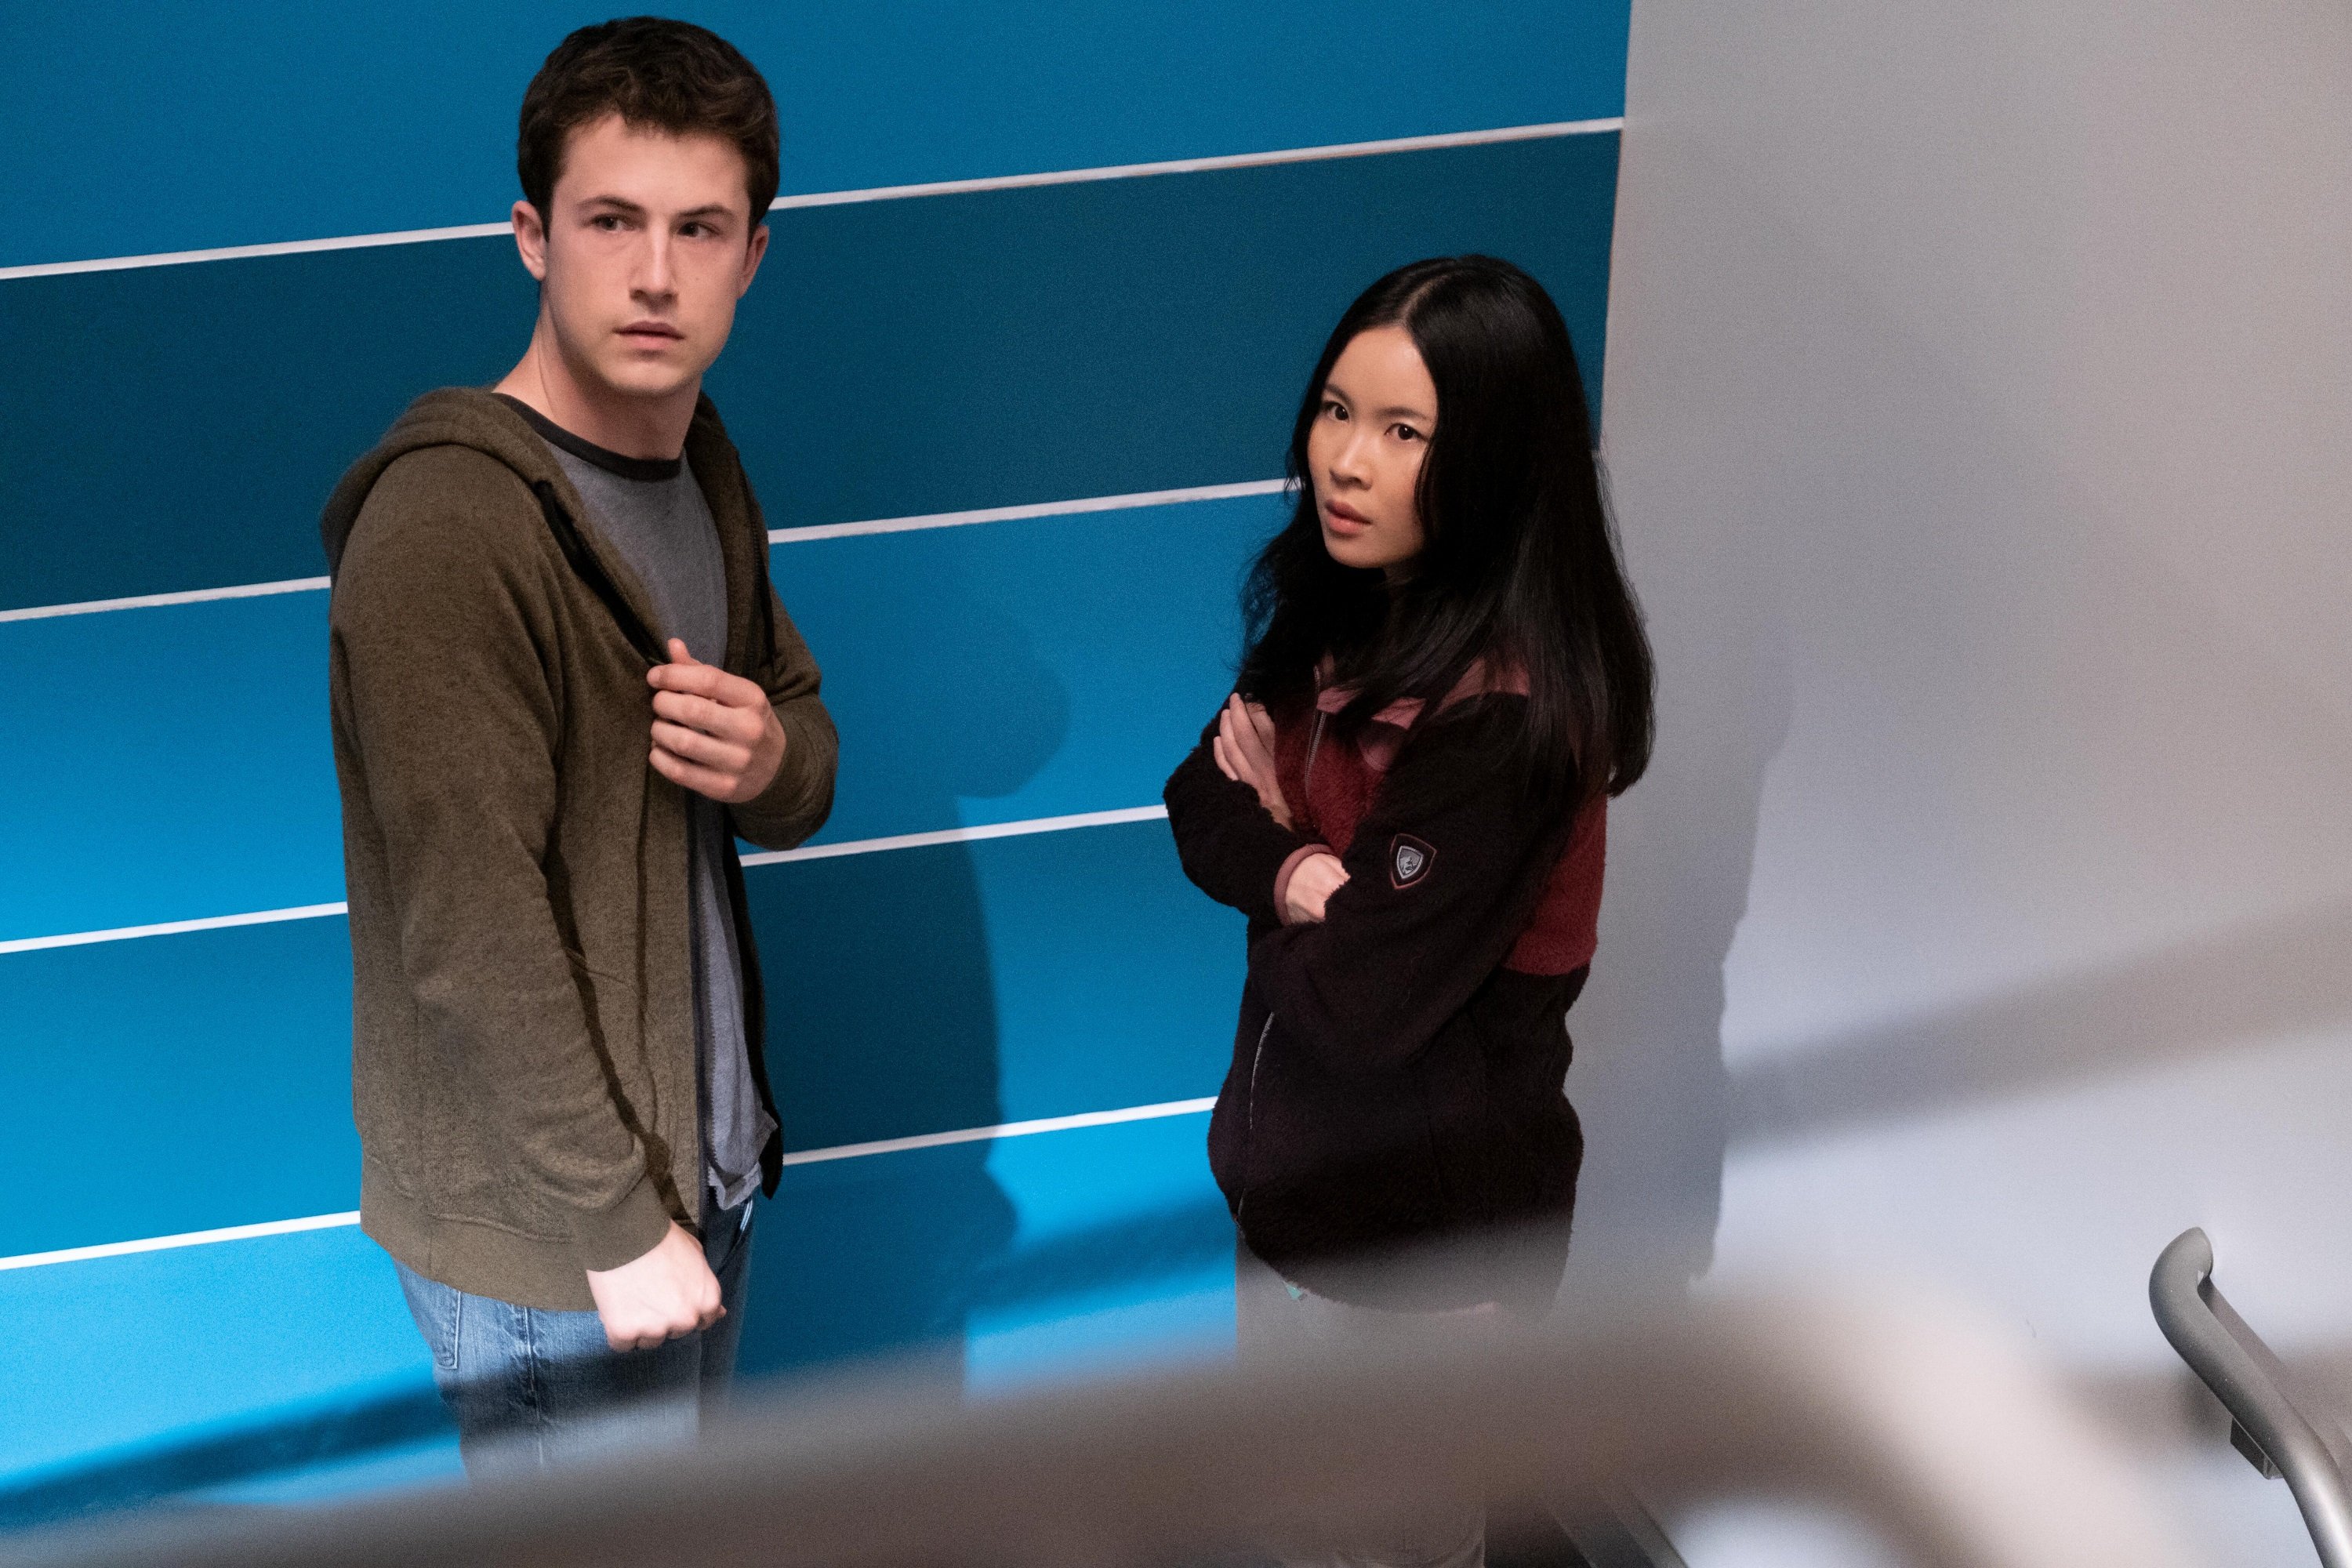 'The Dropout' Tyler Shultz and Erika Cheung portrayed by Dylan Minnette and Camryn Mi-young Kim talking together in a stairwell